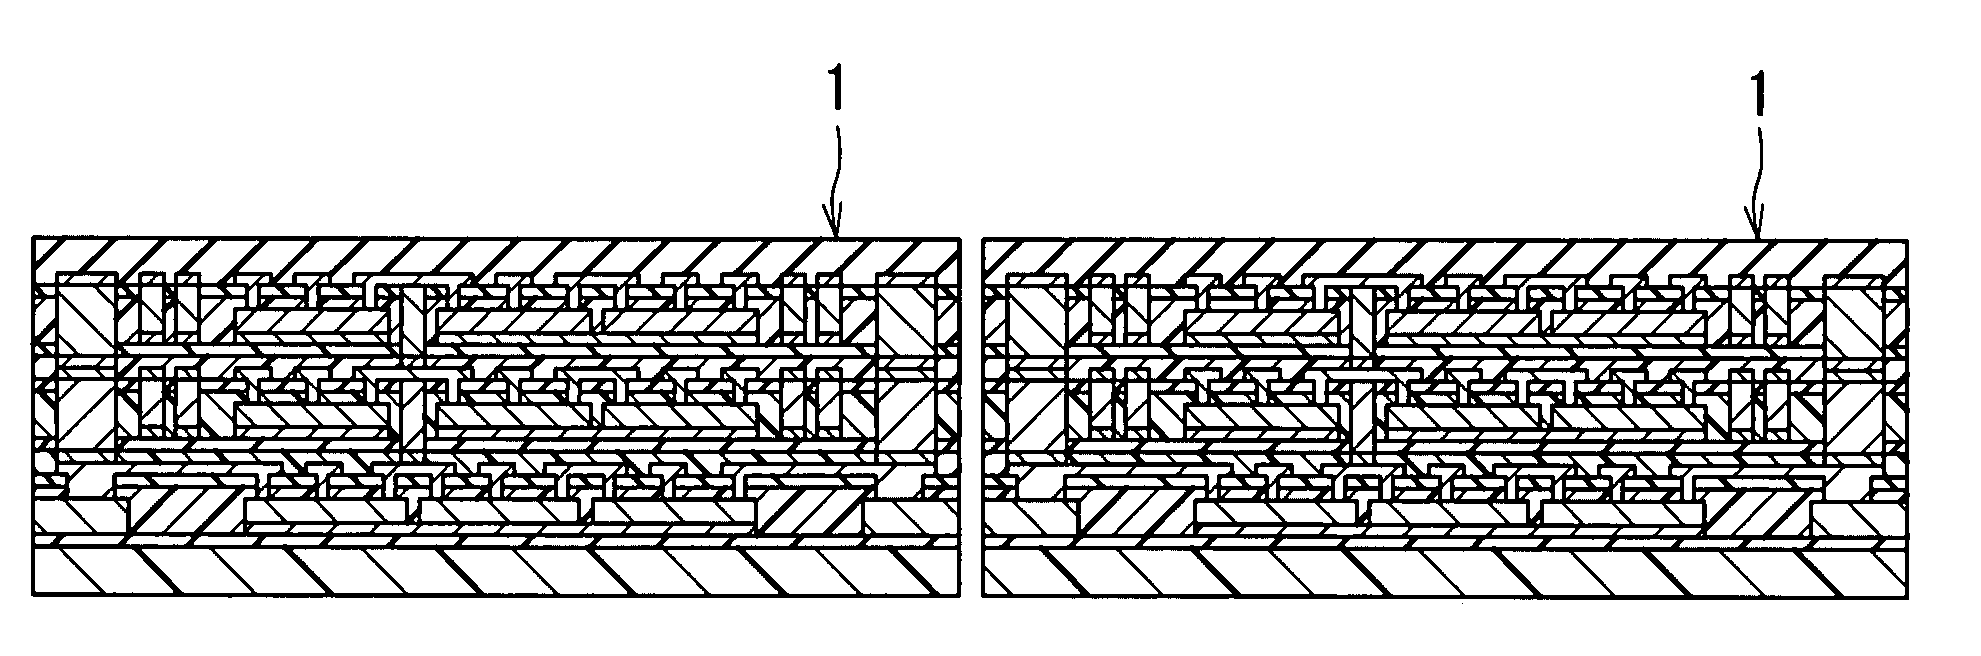 Electronic component package and method of manufacturing same